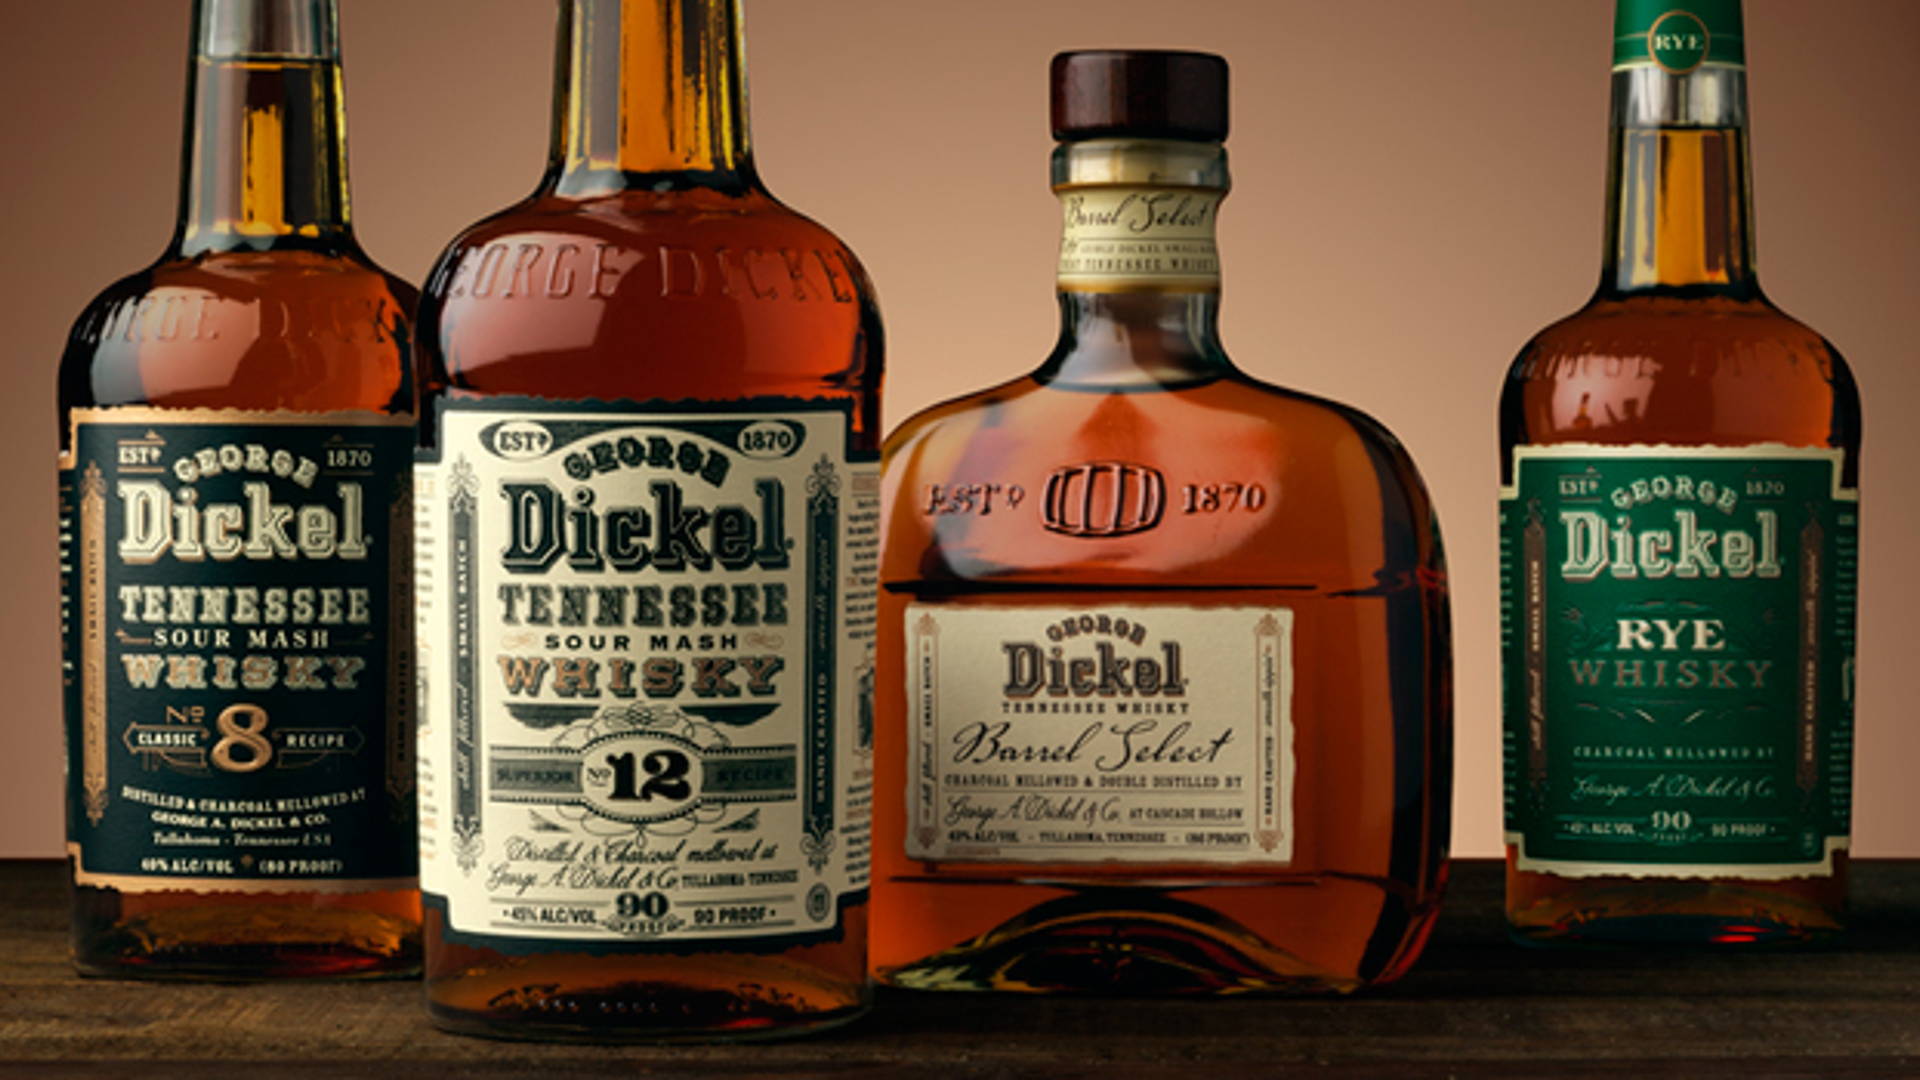 Featured image for George Dickel Tennessee Whisky 